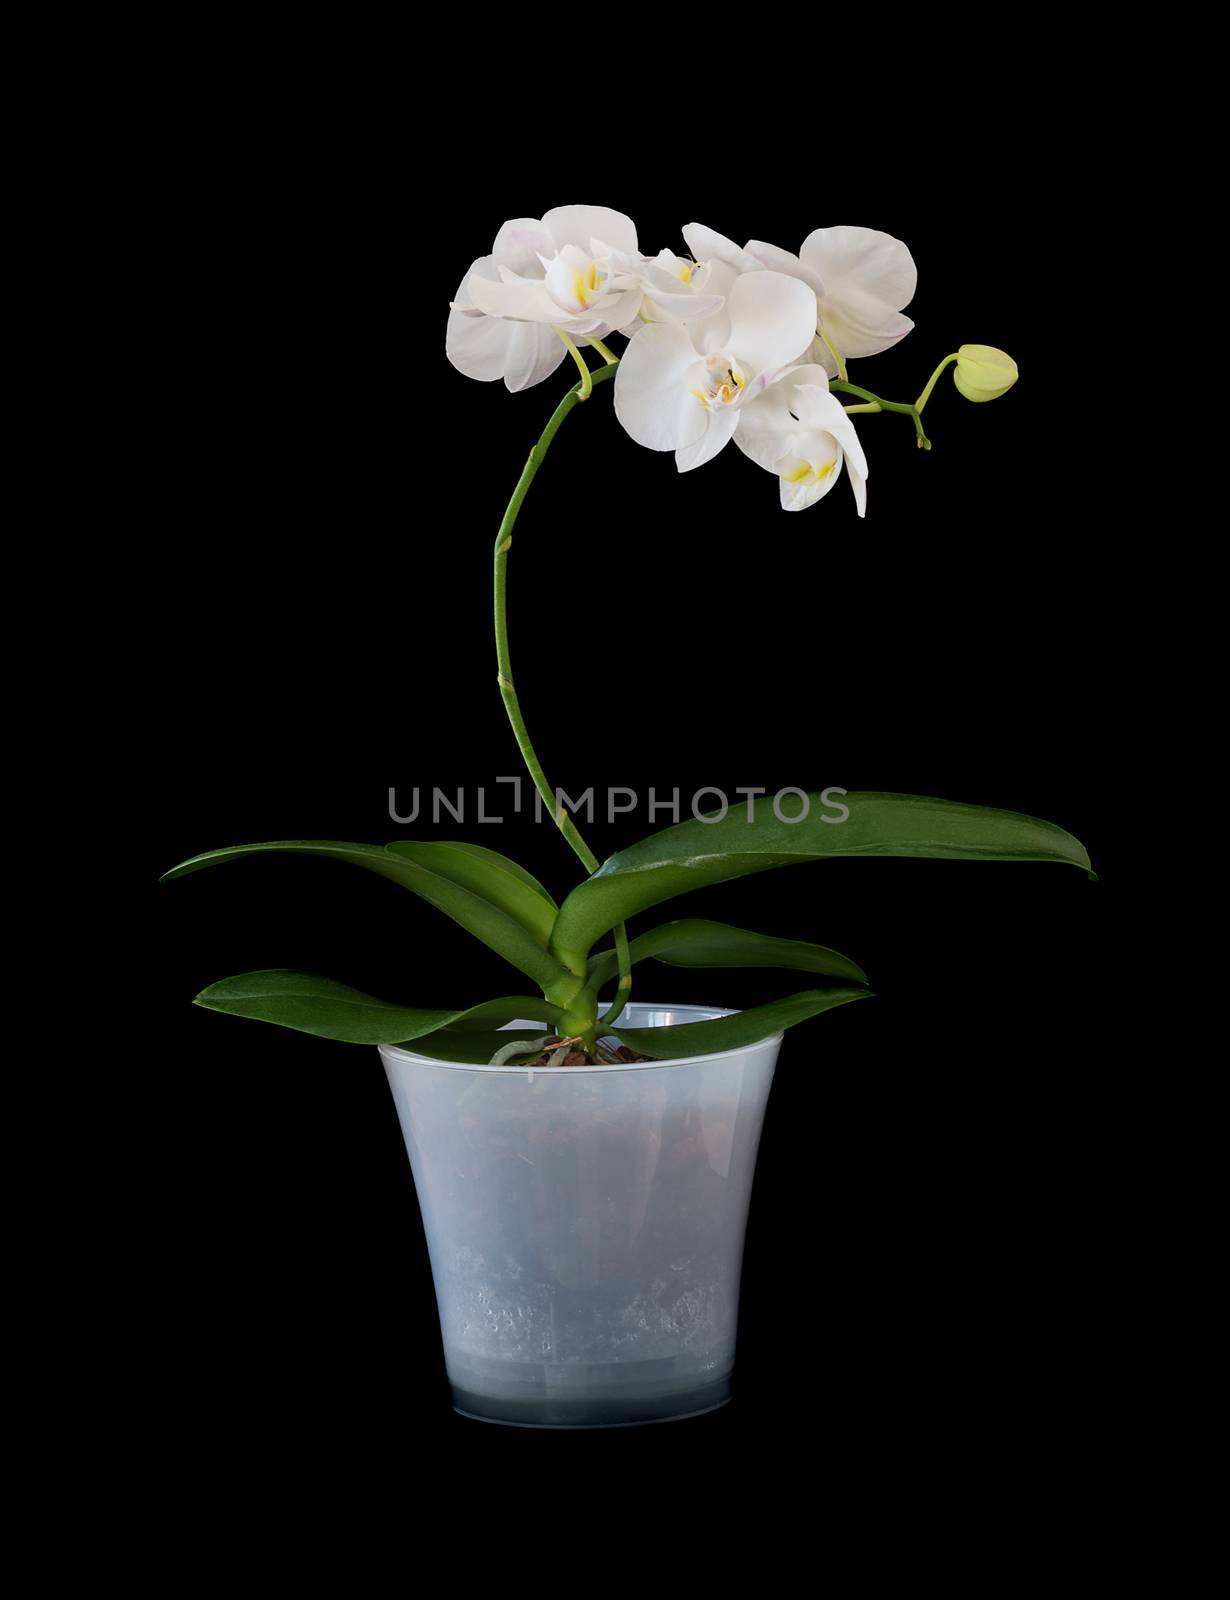 Houseplant plant white phalaenopsis orchid on a long stem with juicy green leaves in a transparent plastic flowerpot isolated on a black background